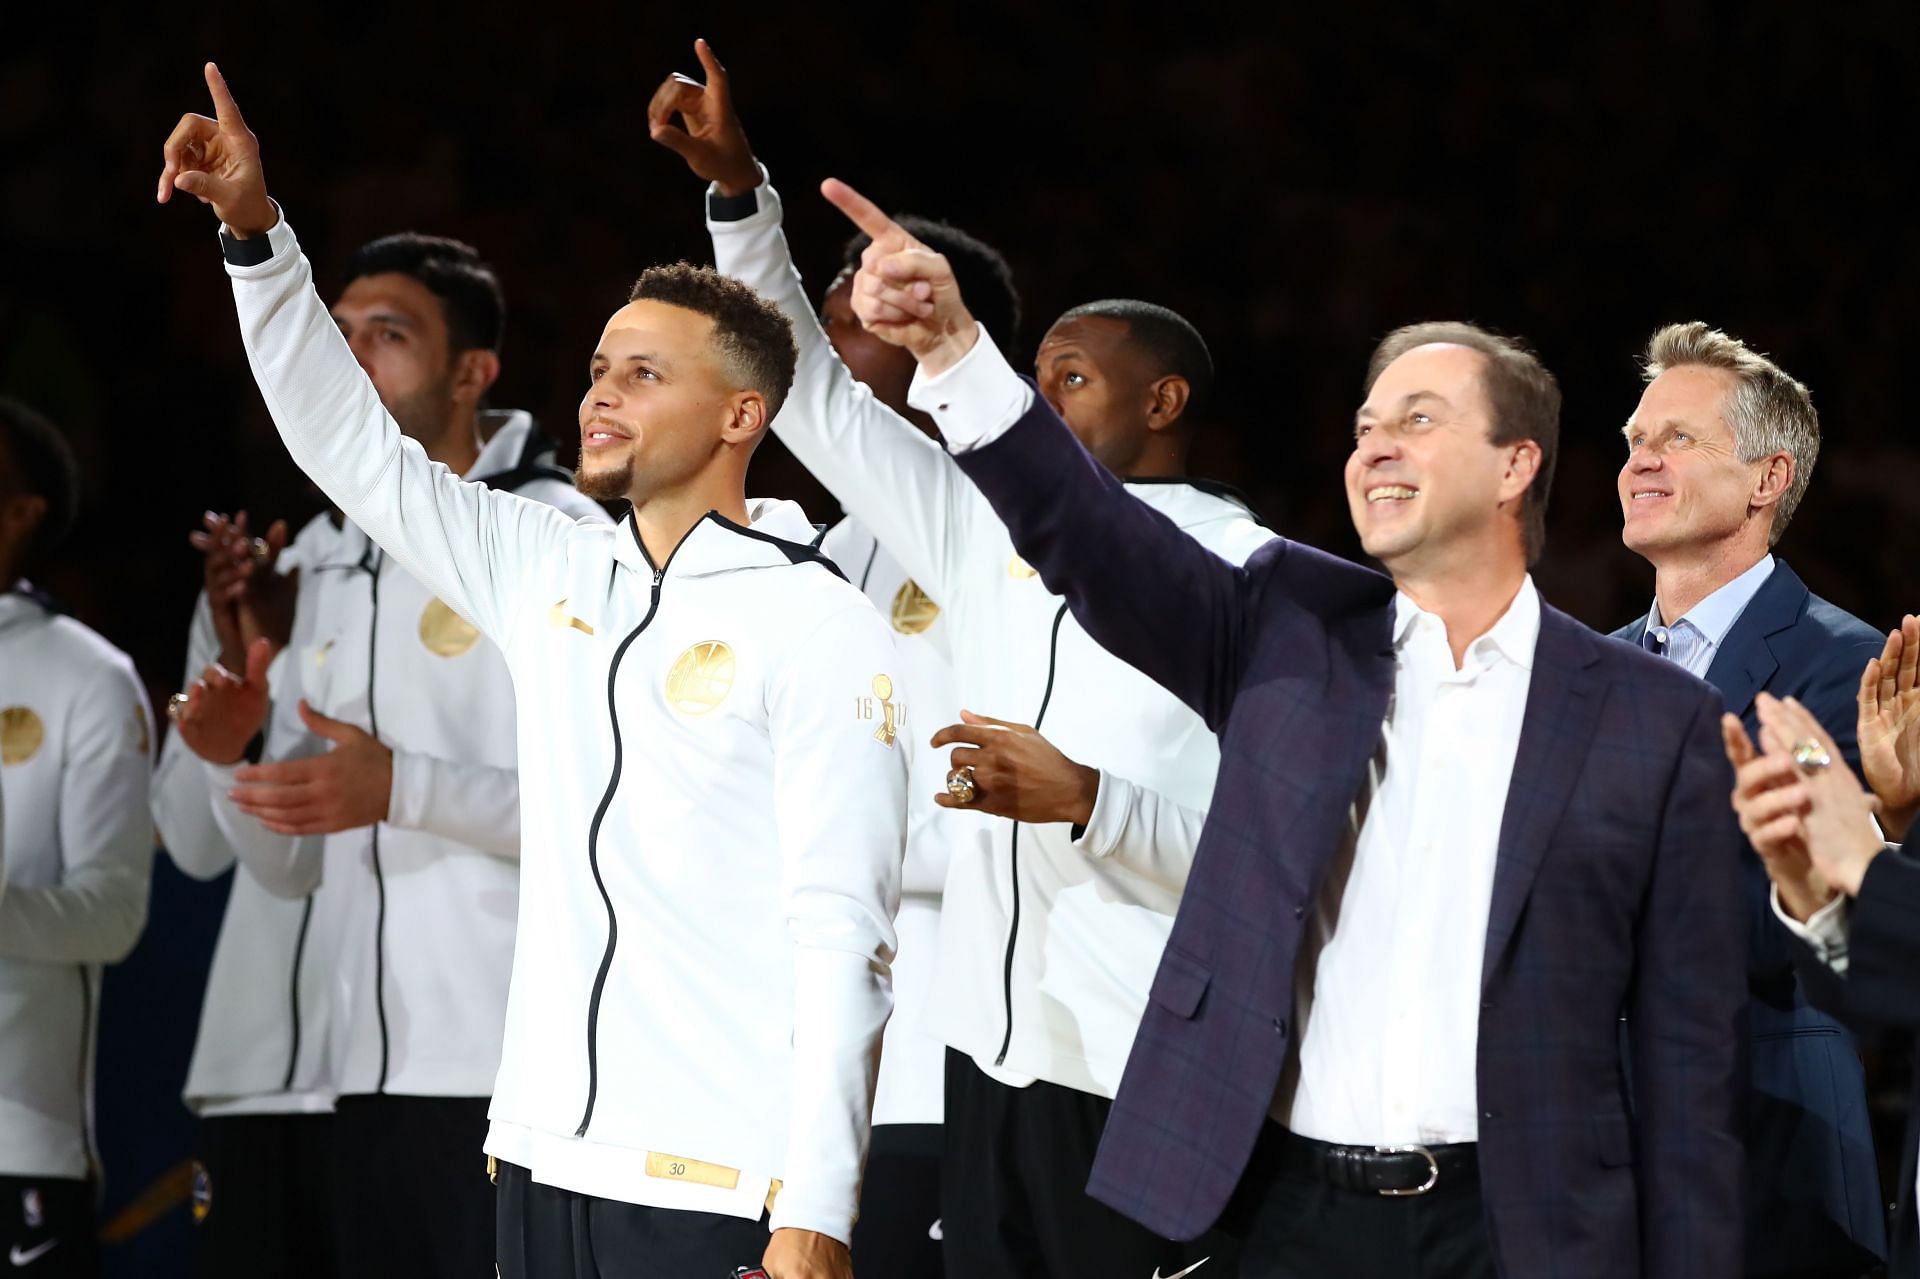 Joe Lacob is confident that Steph Curry and the Golden State Warriors can sustain their success.